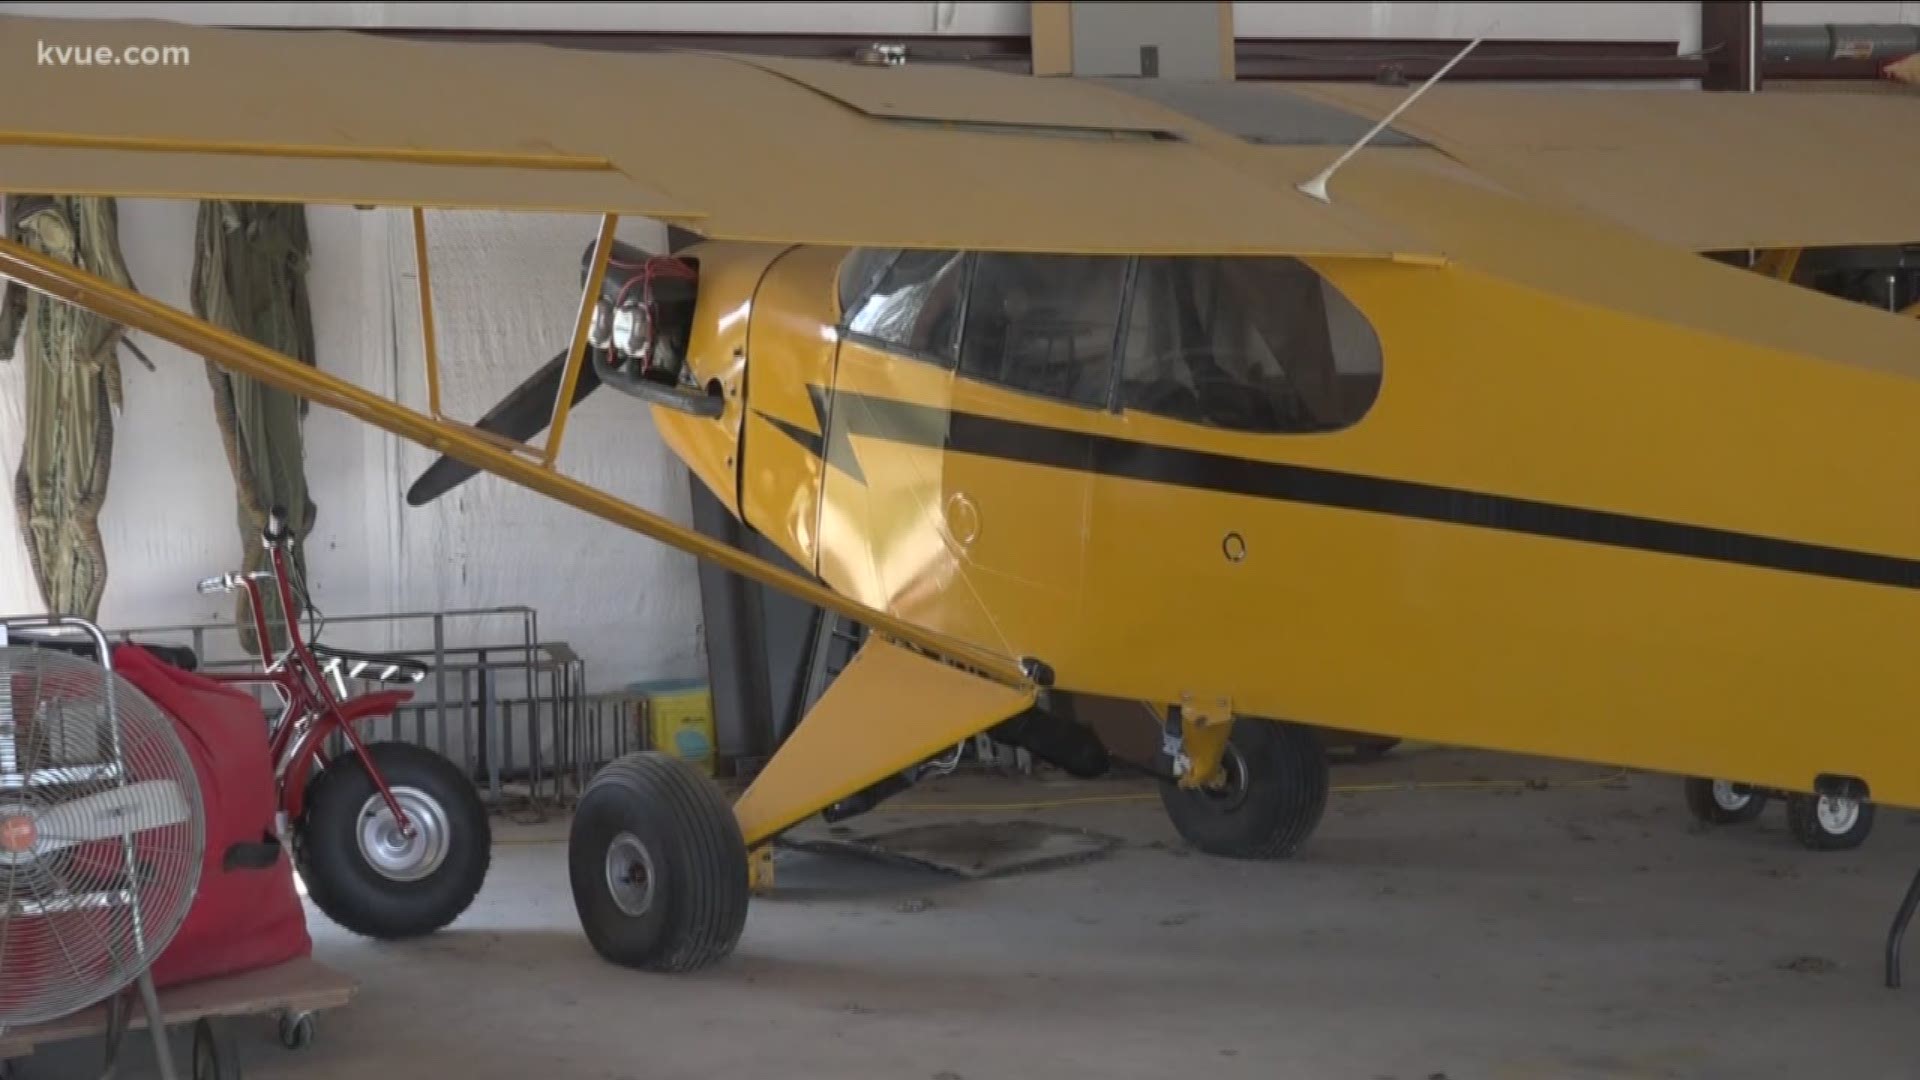 Pilots and airport owners say there's a shortage of hangars for airplanes in Central Texas. That's one of the reasons why Salado is getting a new airport.